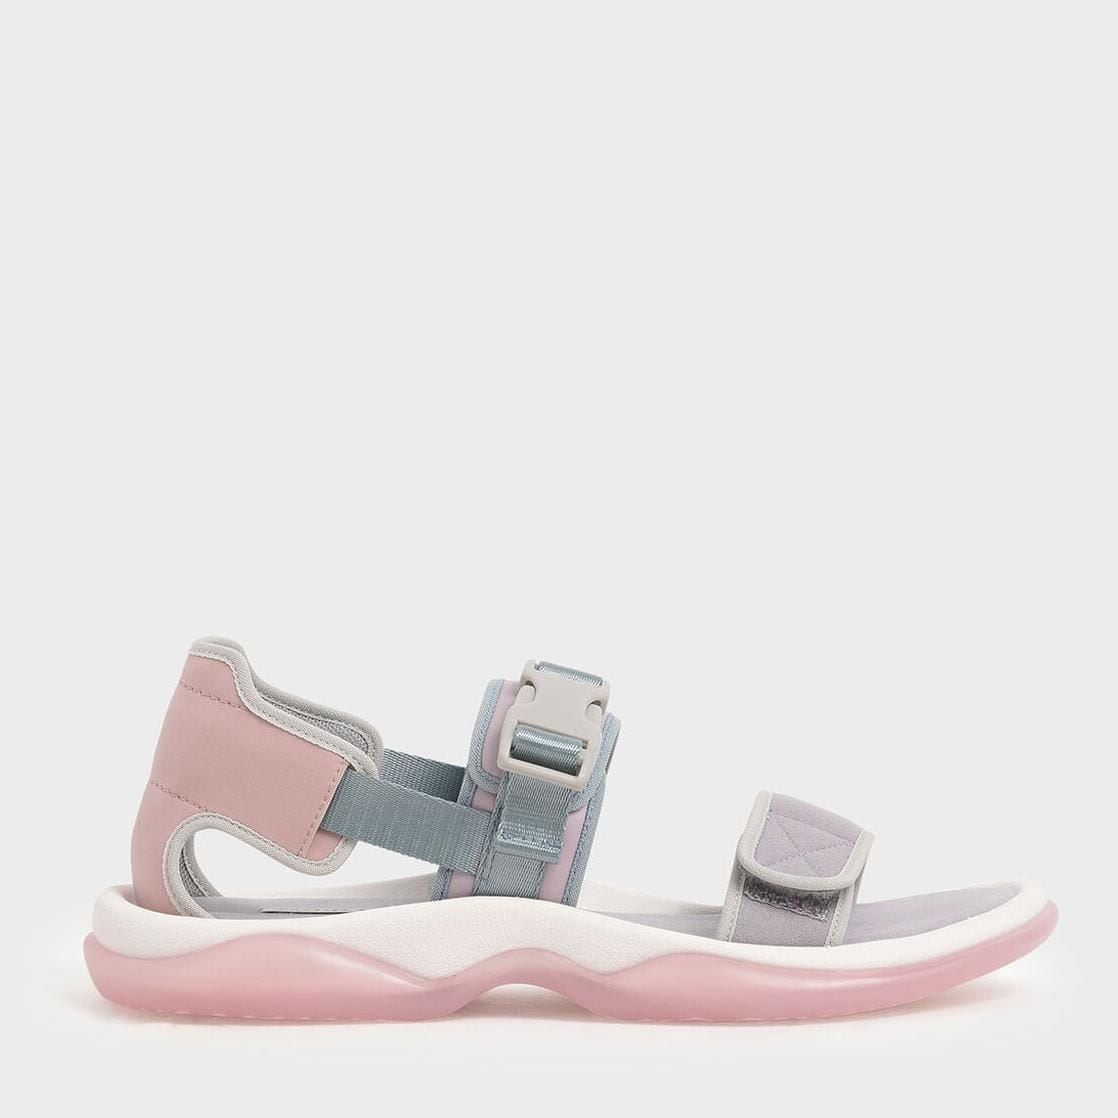 Charles & Keith dad sandals with Velcro straps